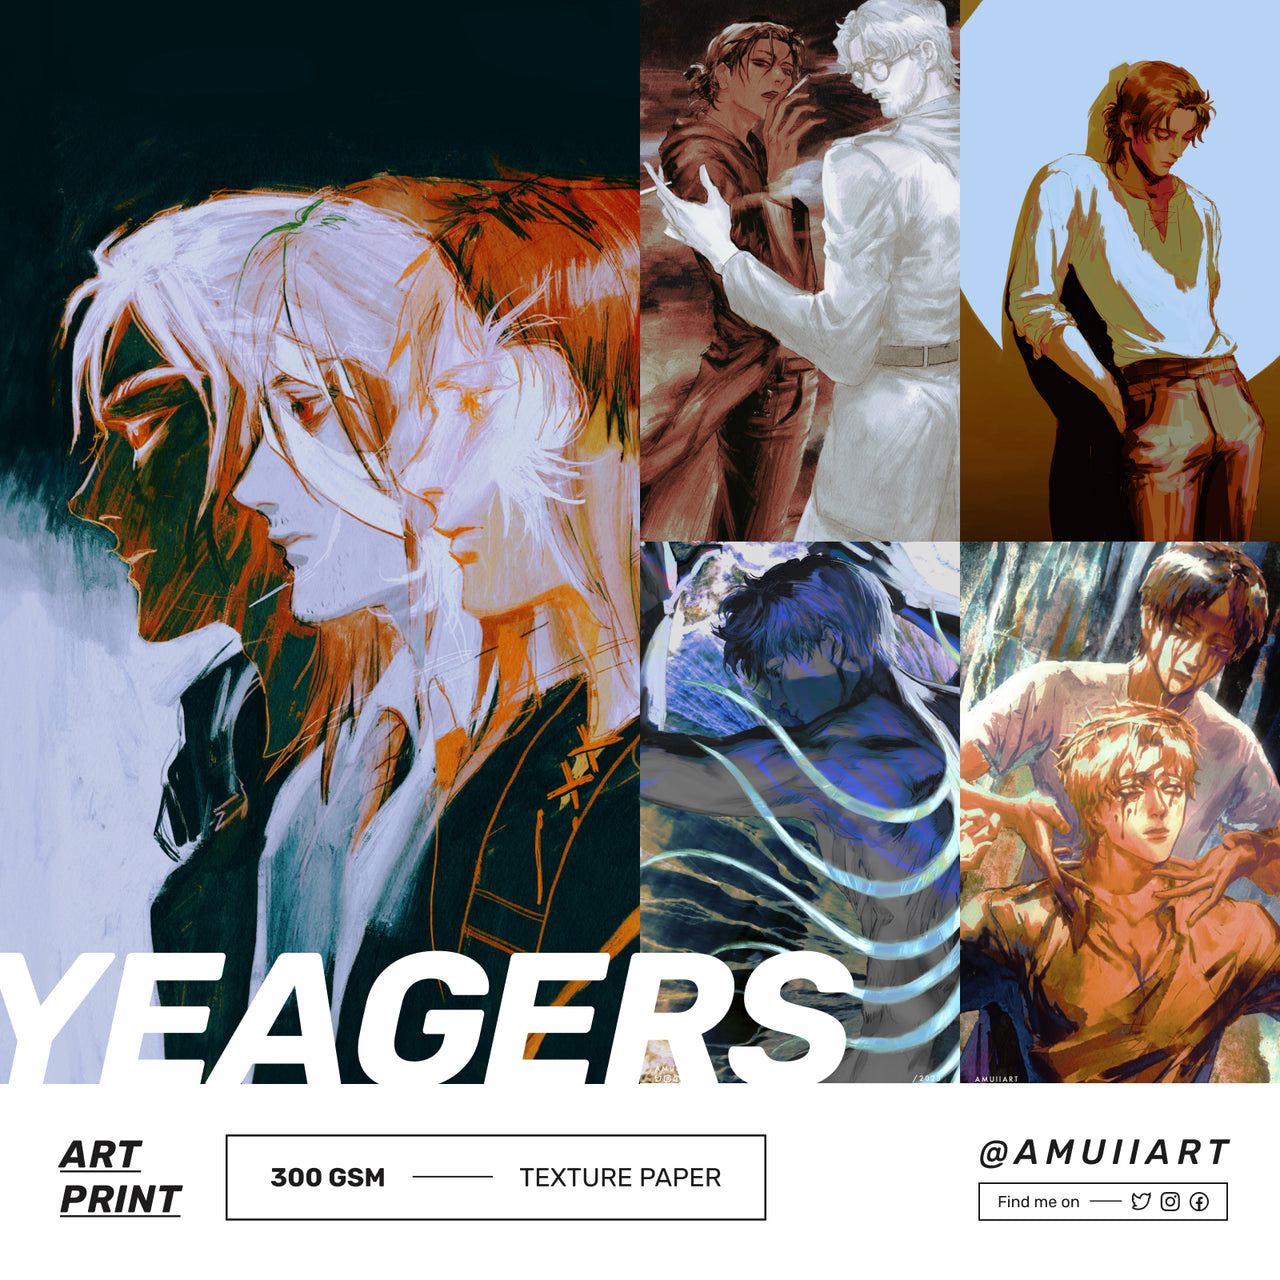 The Yeagers / AOT Art Prints